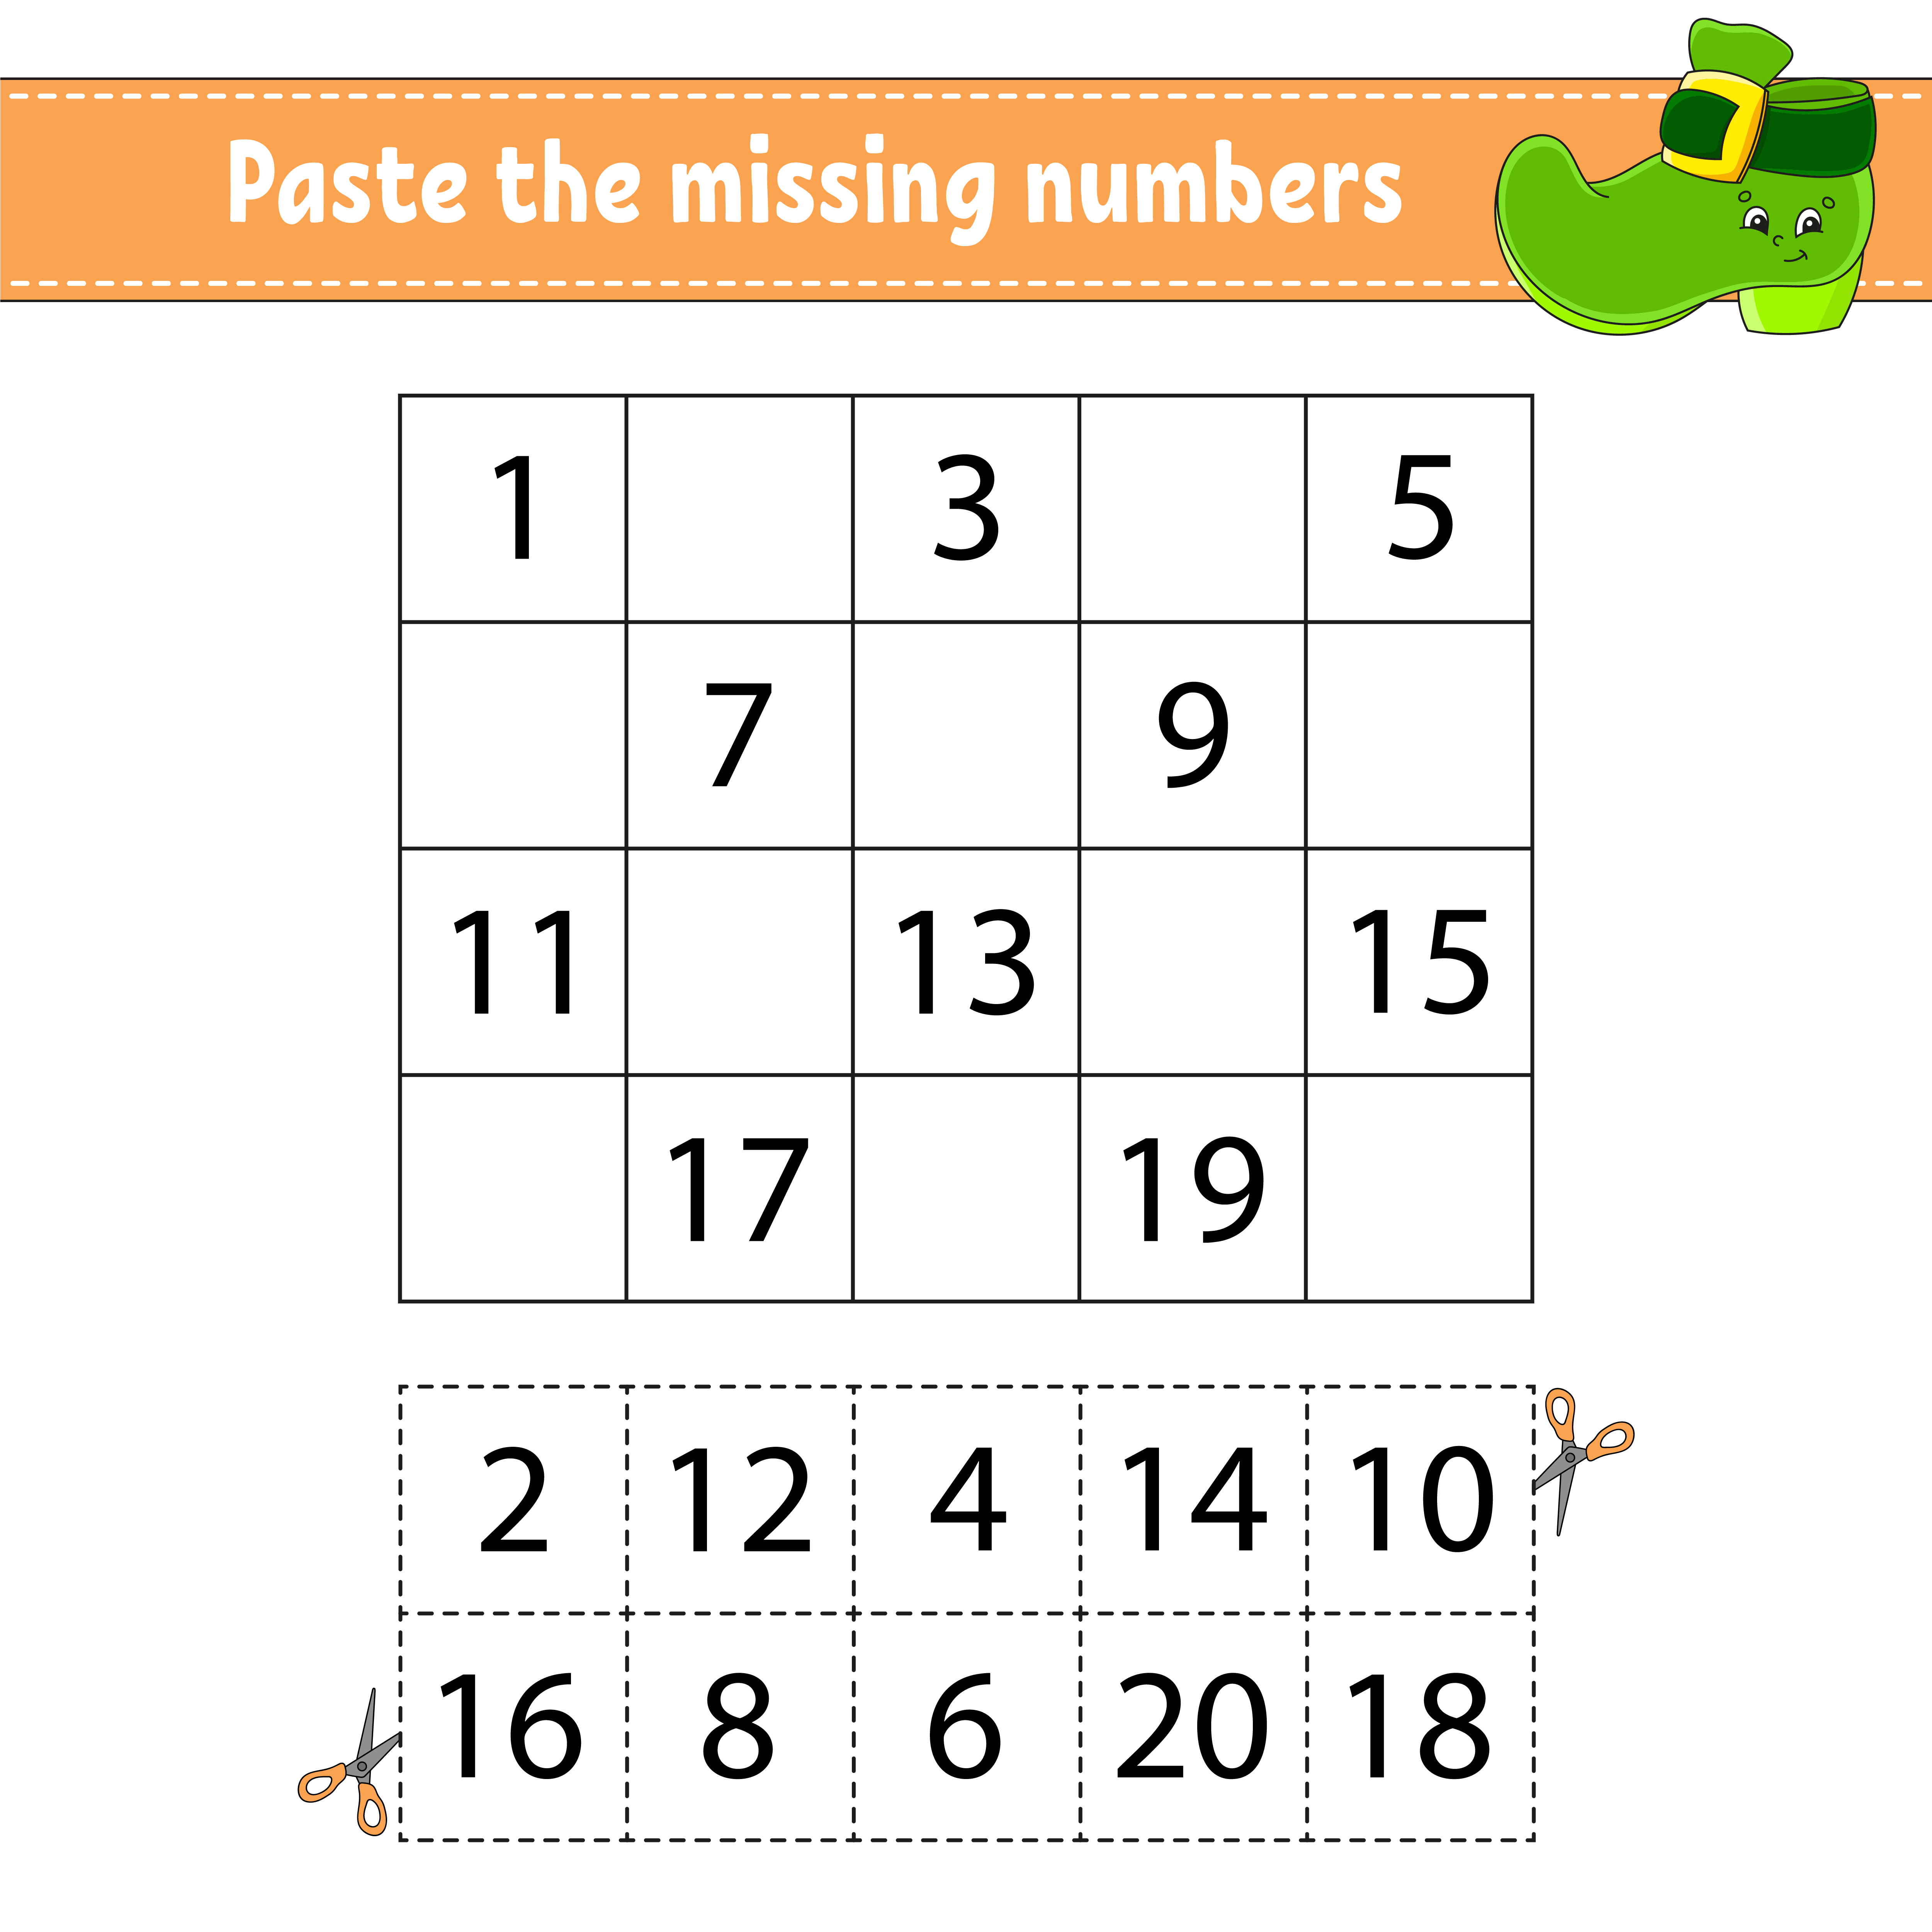 paste-the-missing-numbers-1-20-game-for-children-handwriting-practice-learning-numbers-for